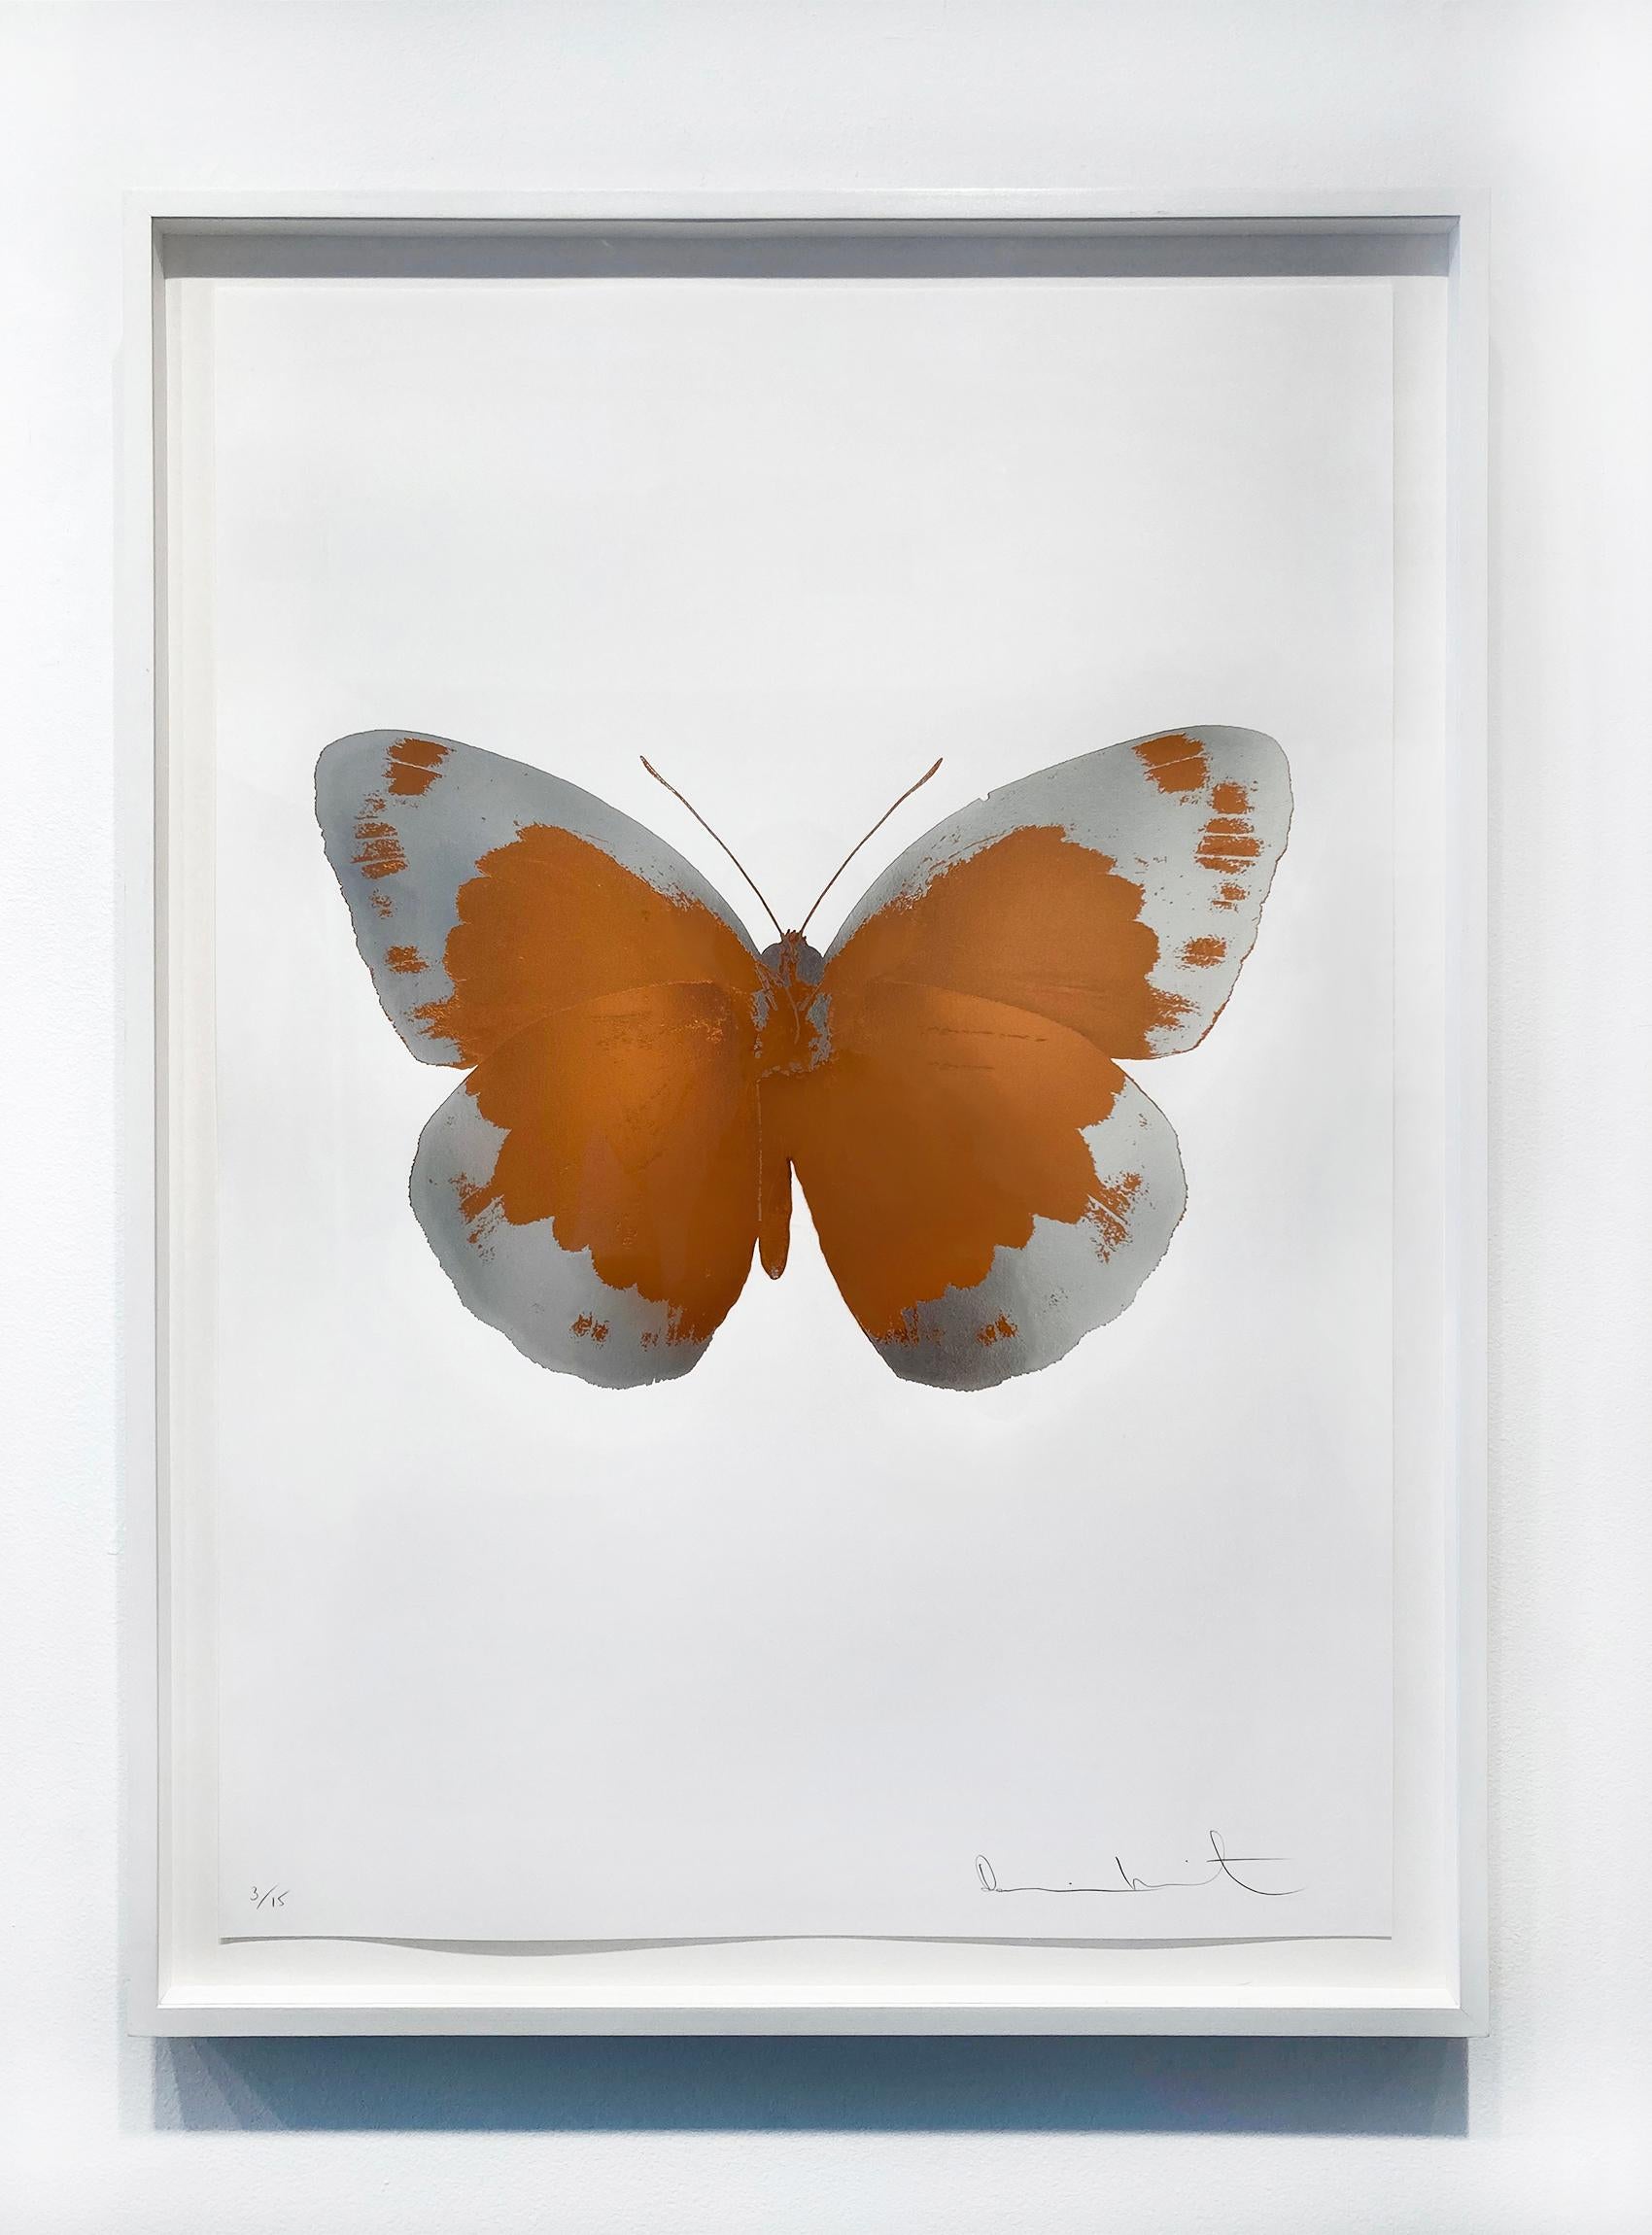 The Souls II - Prairie Copper/Silver Gloss - Contemporary Print by Damien Hirst